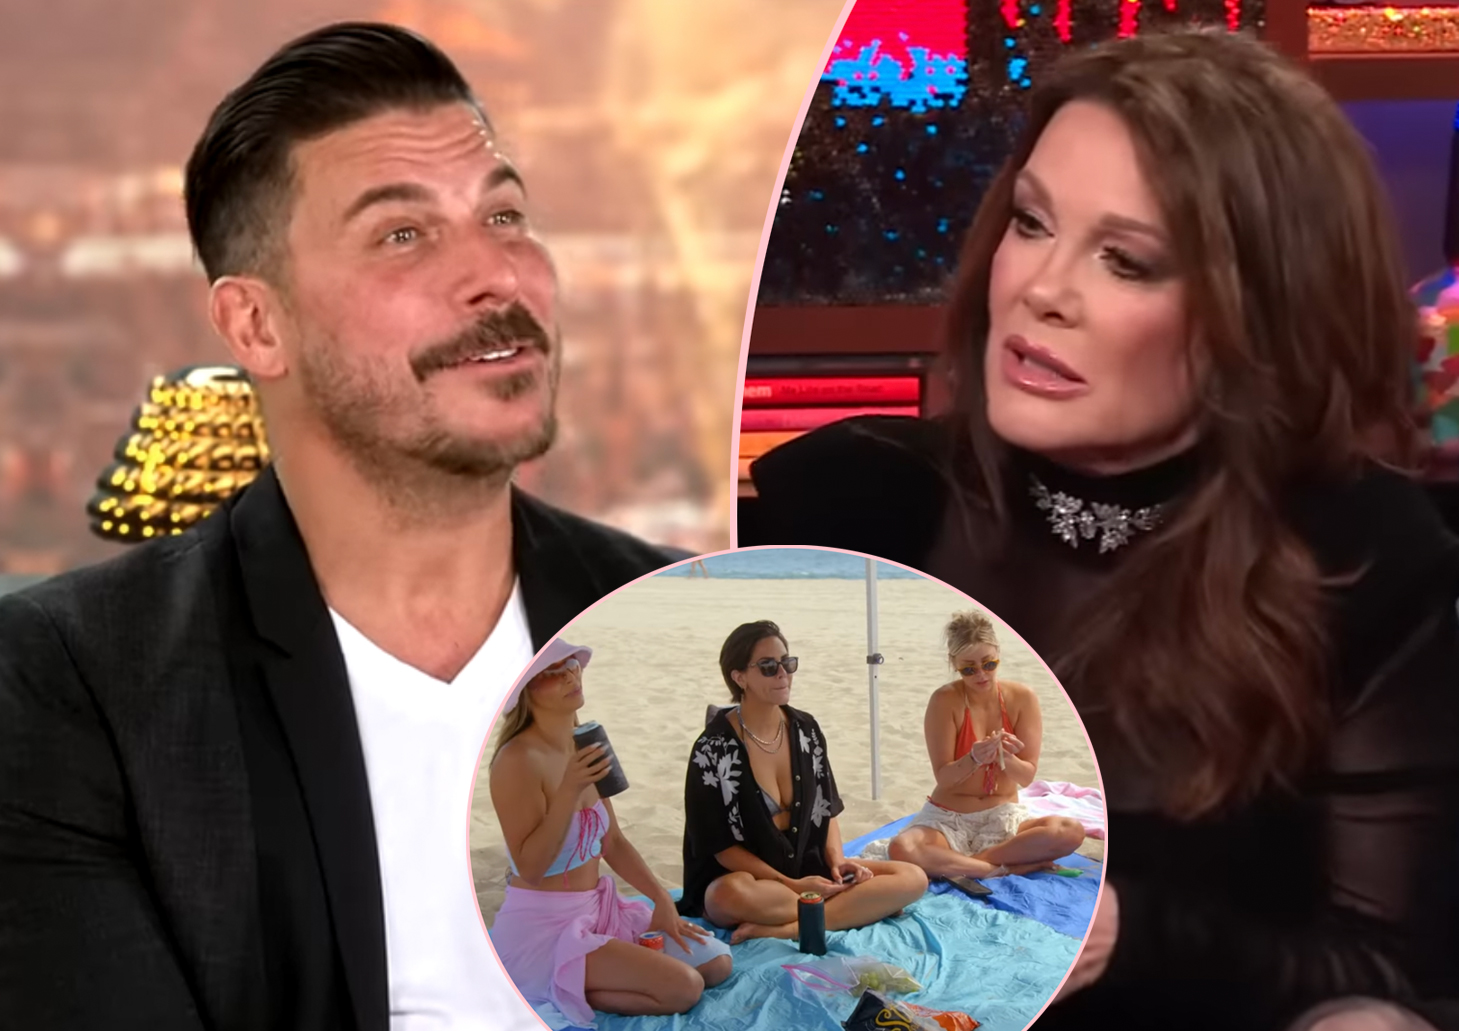 #Jax Taylor Goes OFF About VPR! Claims The Show Is ‘Scripted’ Now!